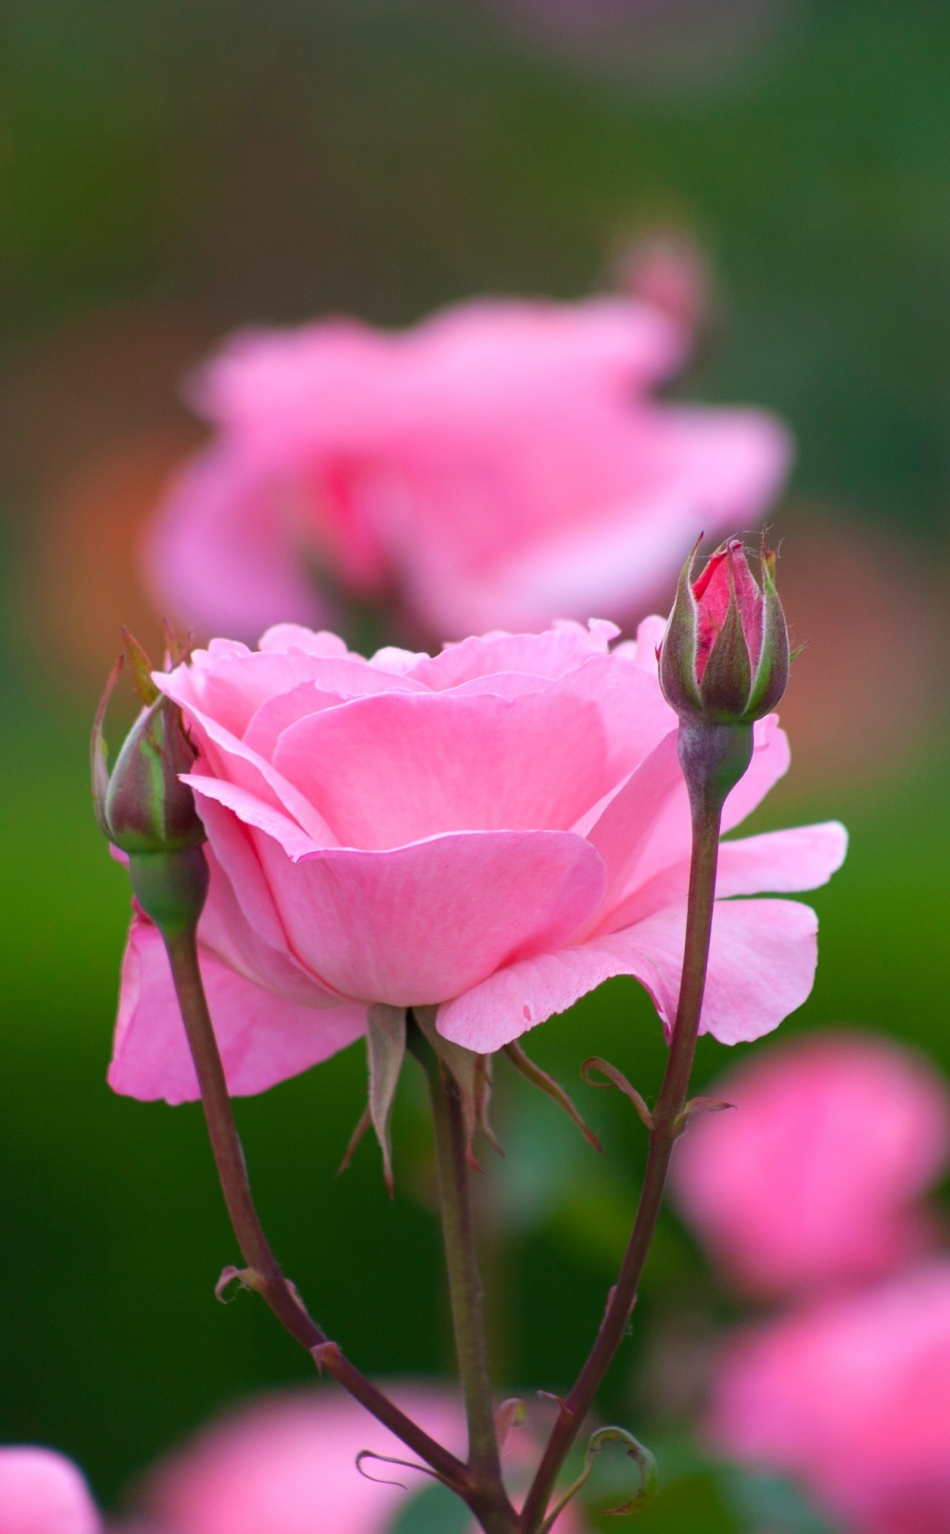 Download wallpaper 950x1534 rose, flowers, bloom, bud, pink, portrait,  iphone, 950x1534 hd background, 5549